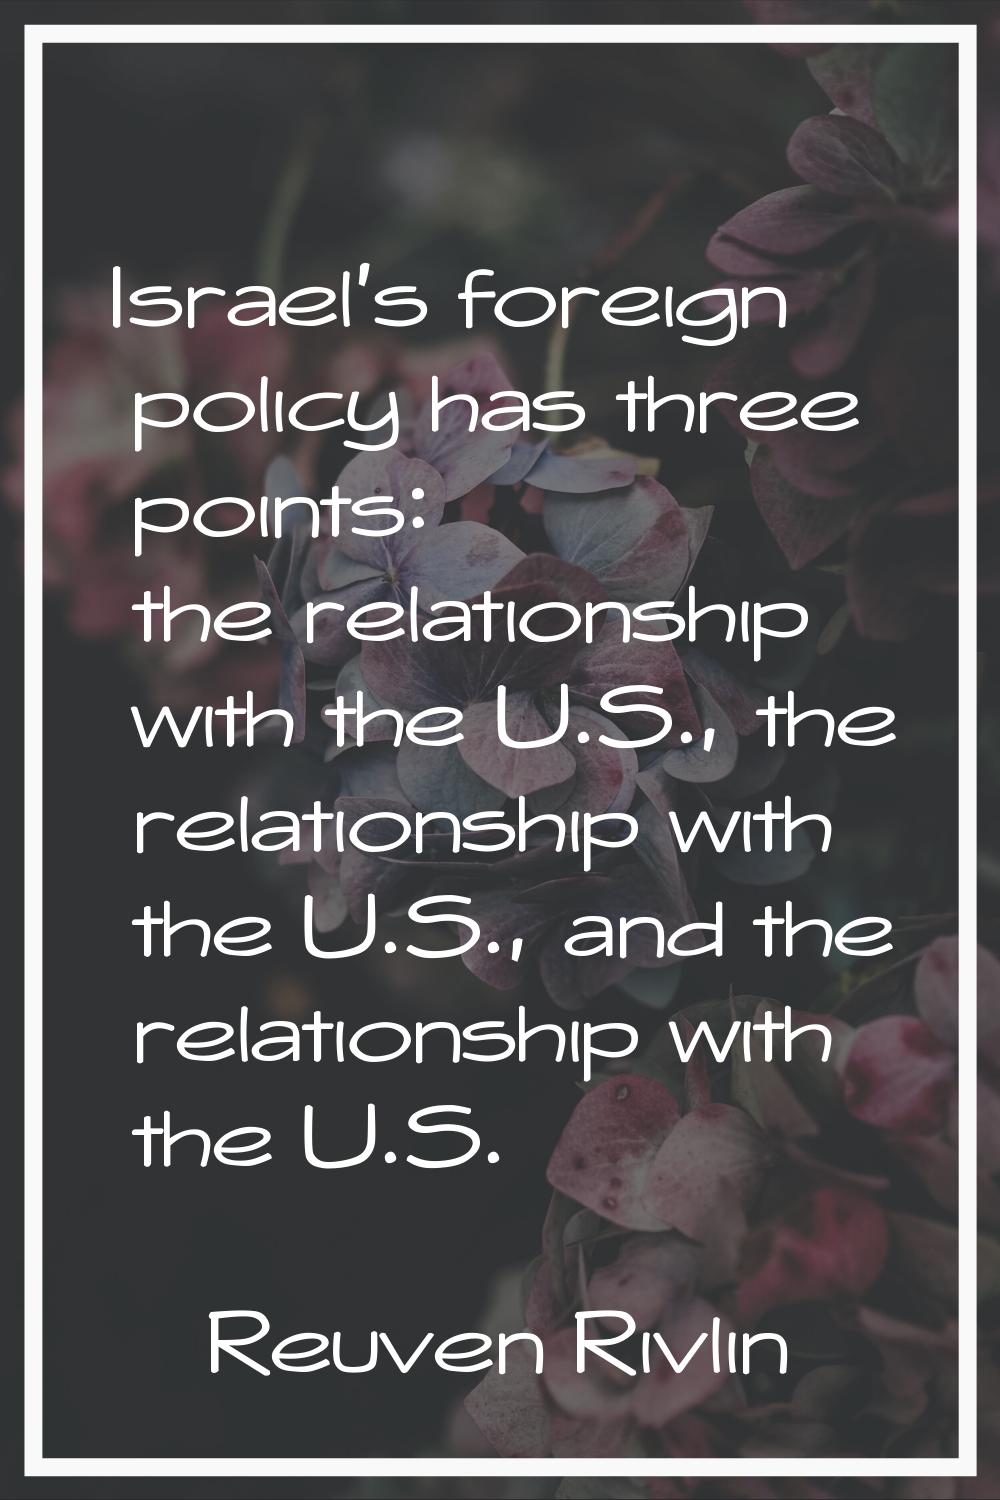 Israel's foreign policy has three points: the relationship with the U.S., the relationship with the